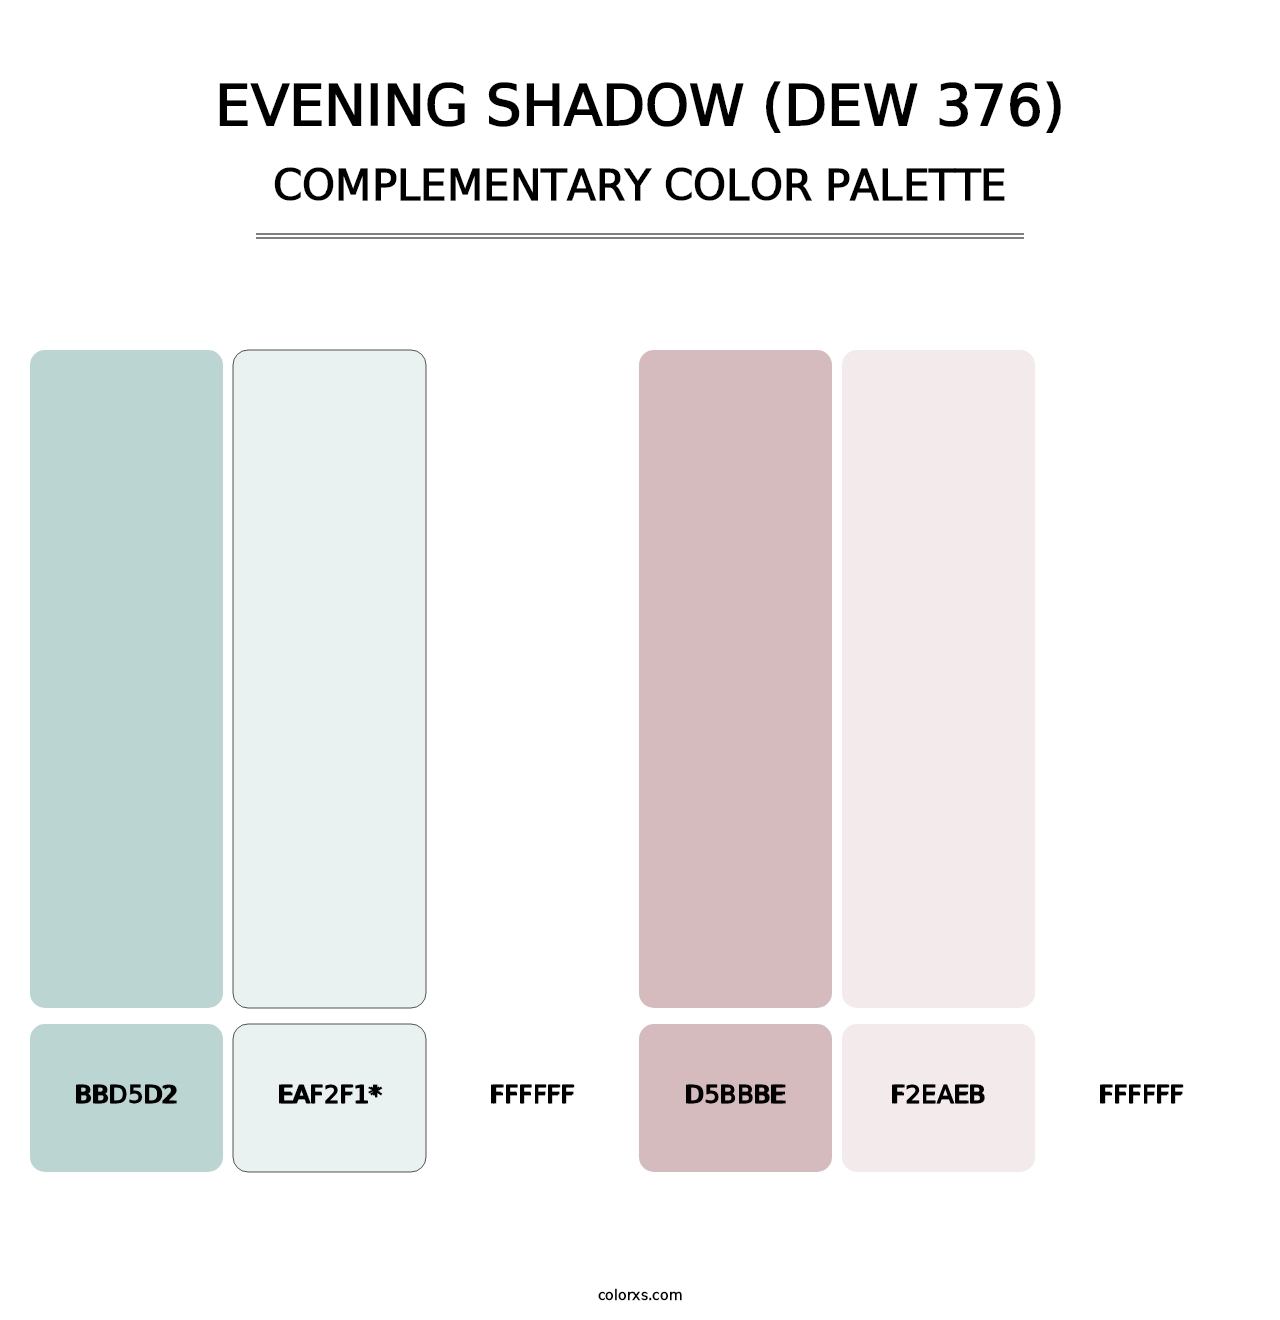 Evening Shadow (DEW 376) - Complementary Color Palette